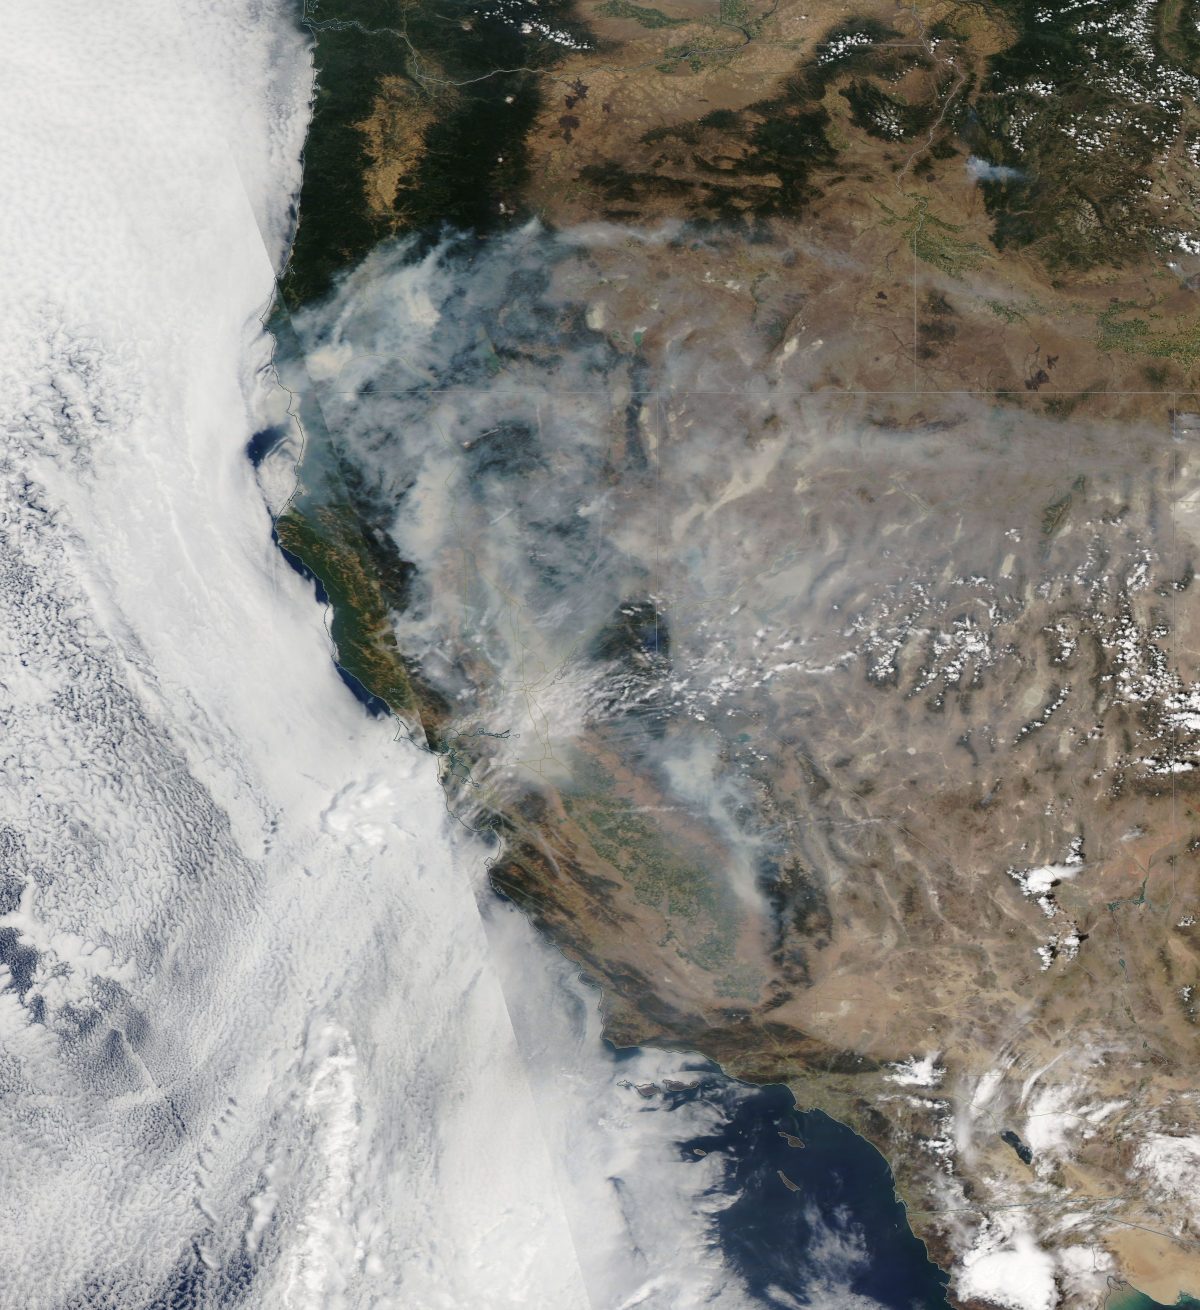 Satellite imagery reveals a shocking blanket of thick smoke smothering huge portions of California and Oregon